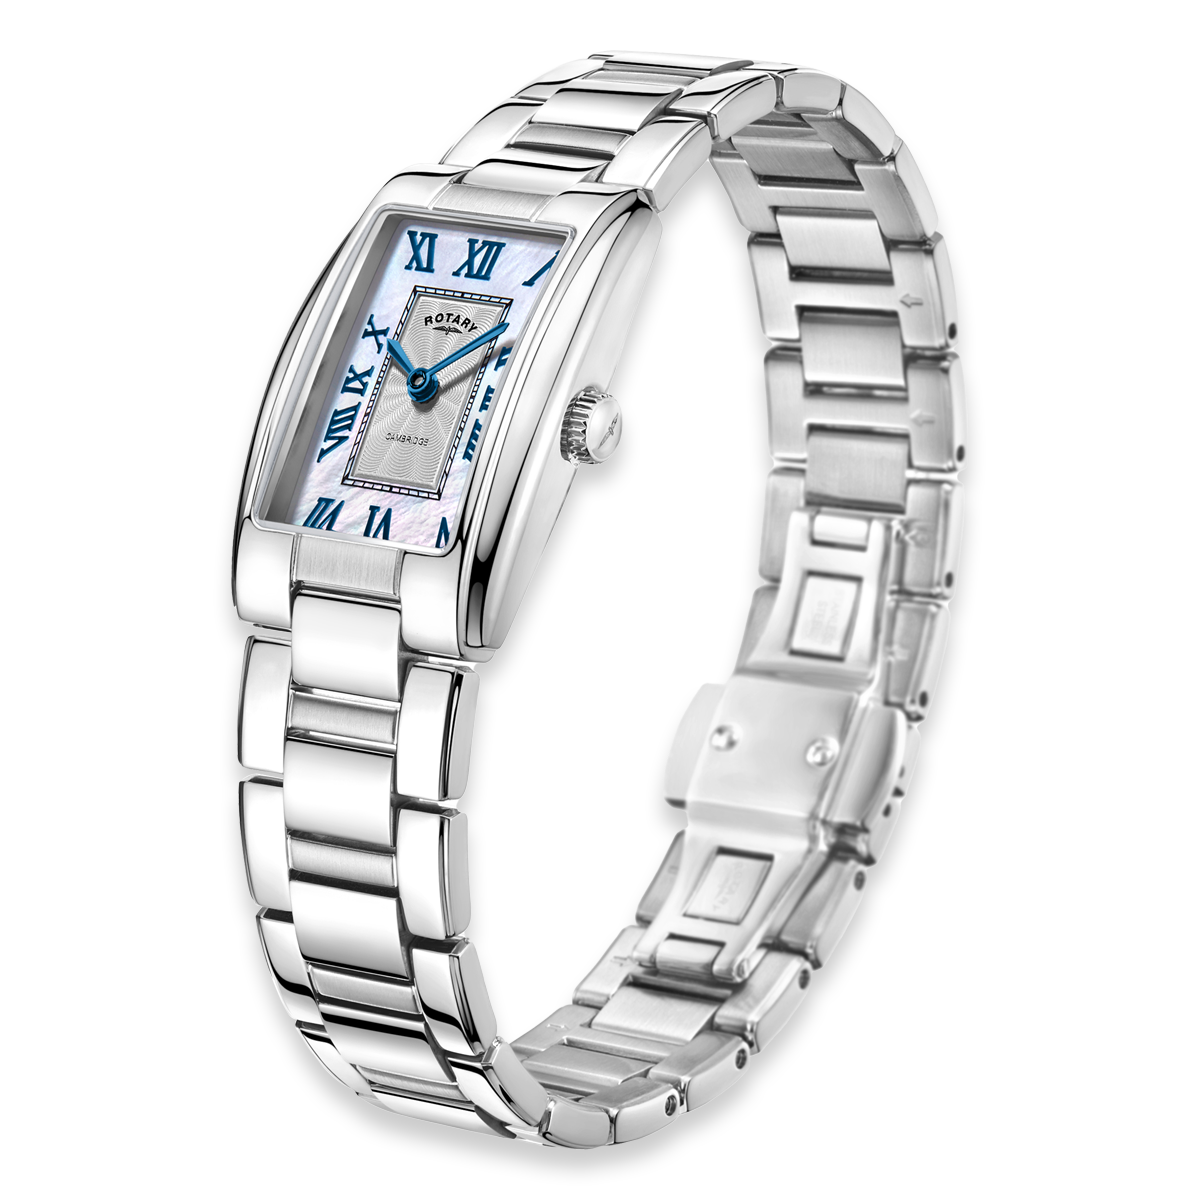 Rotary Cambridge Watch, Mother of Pearl Rectangular Dial with Stainless Steel Bracelet - LB05435/07